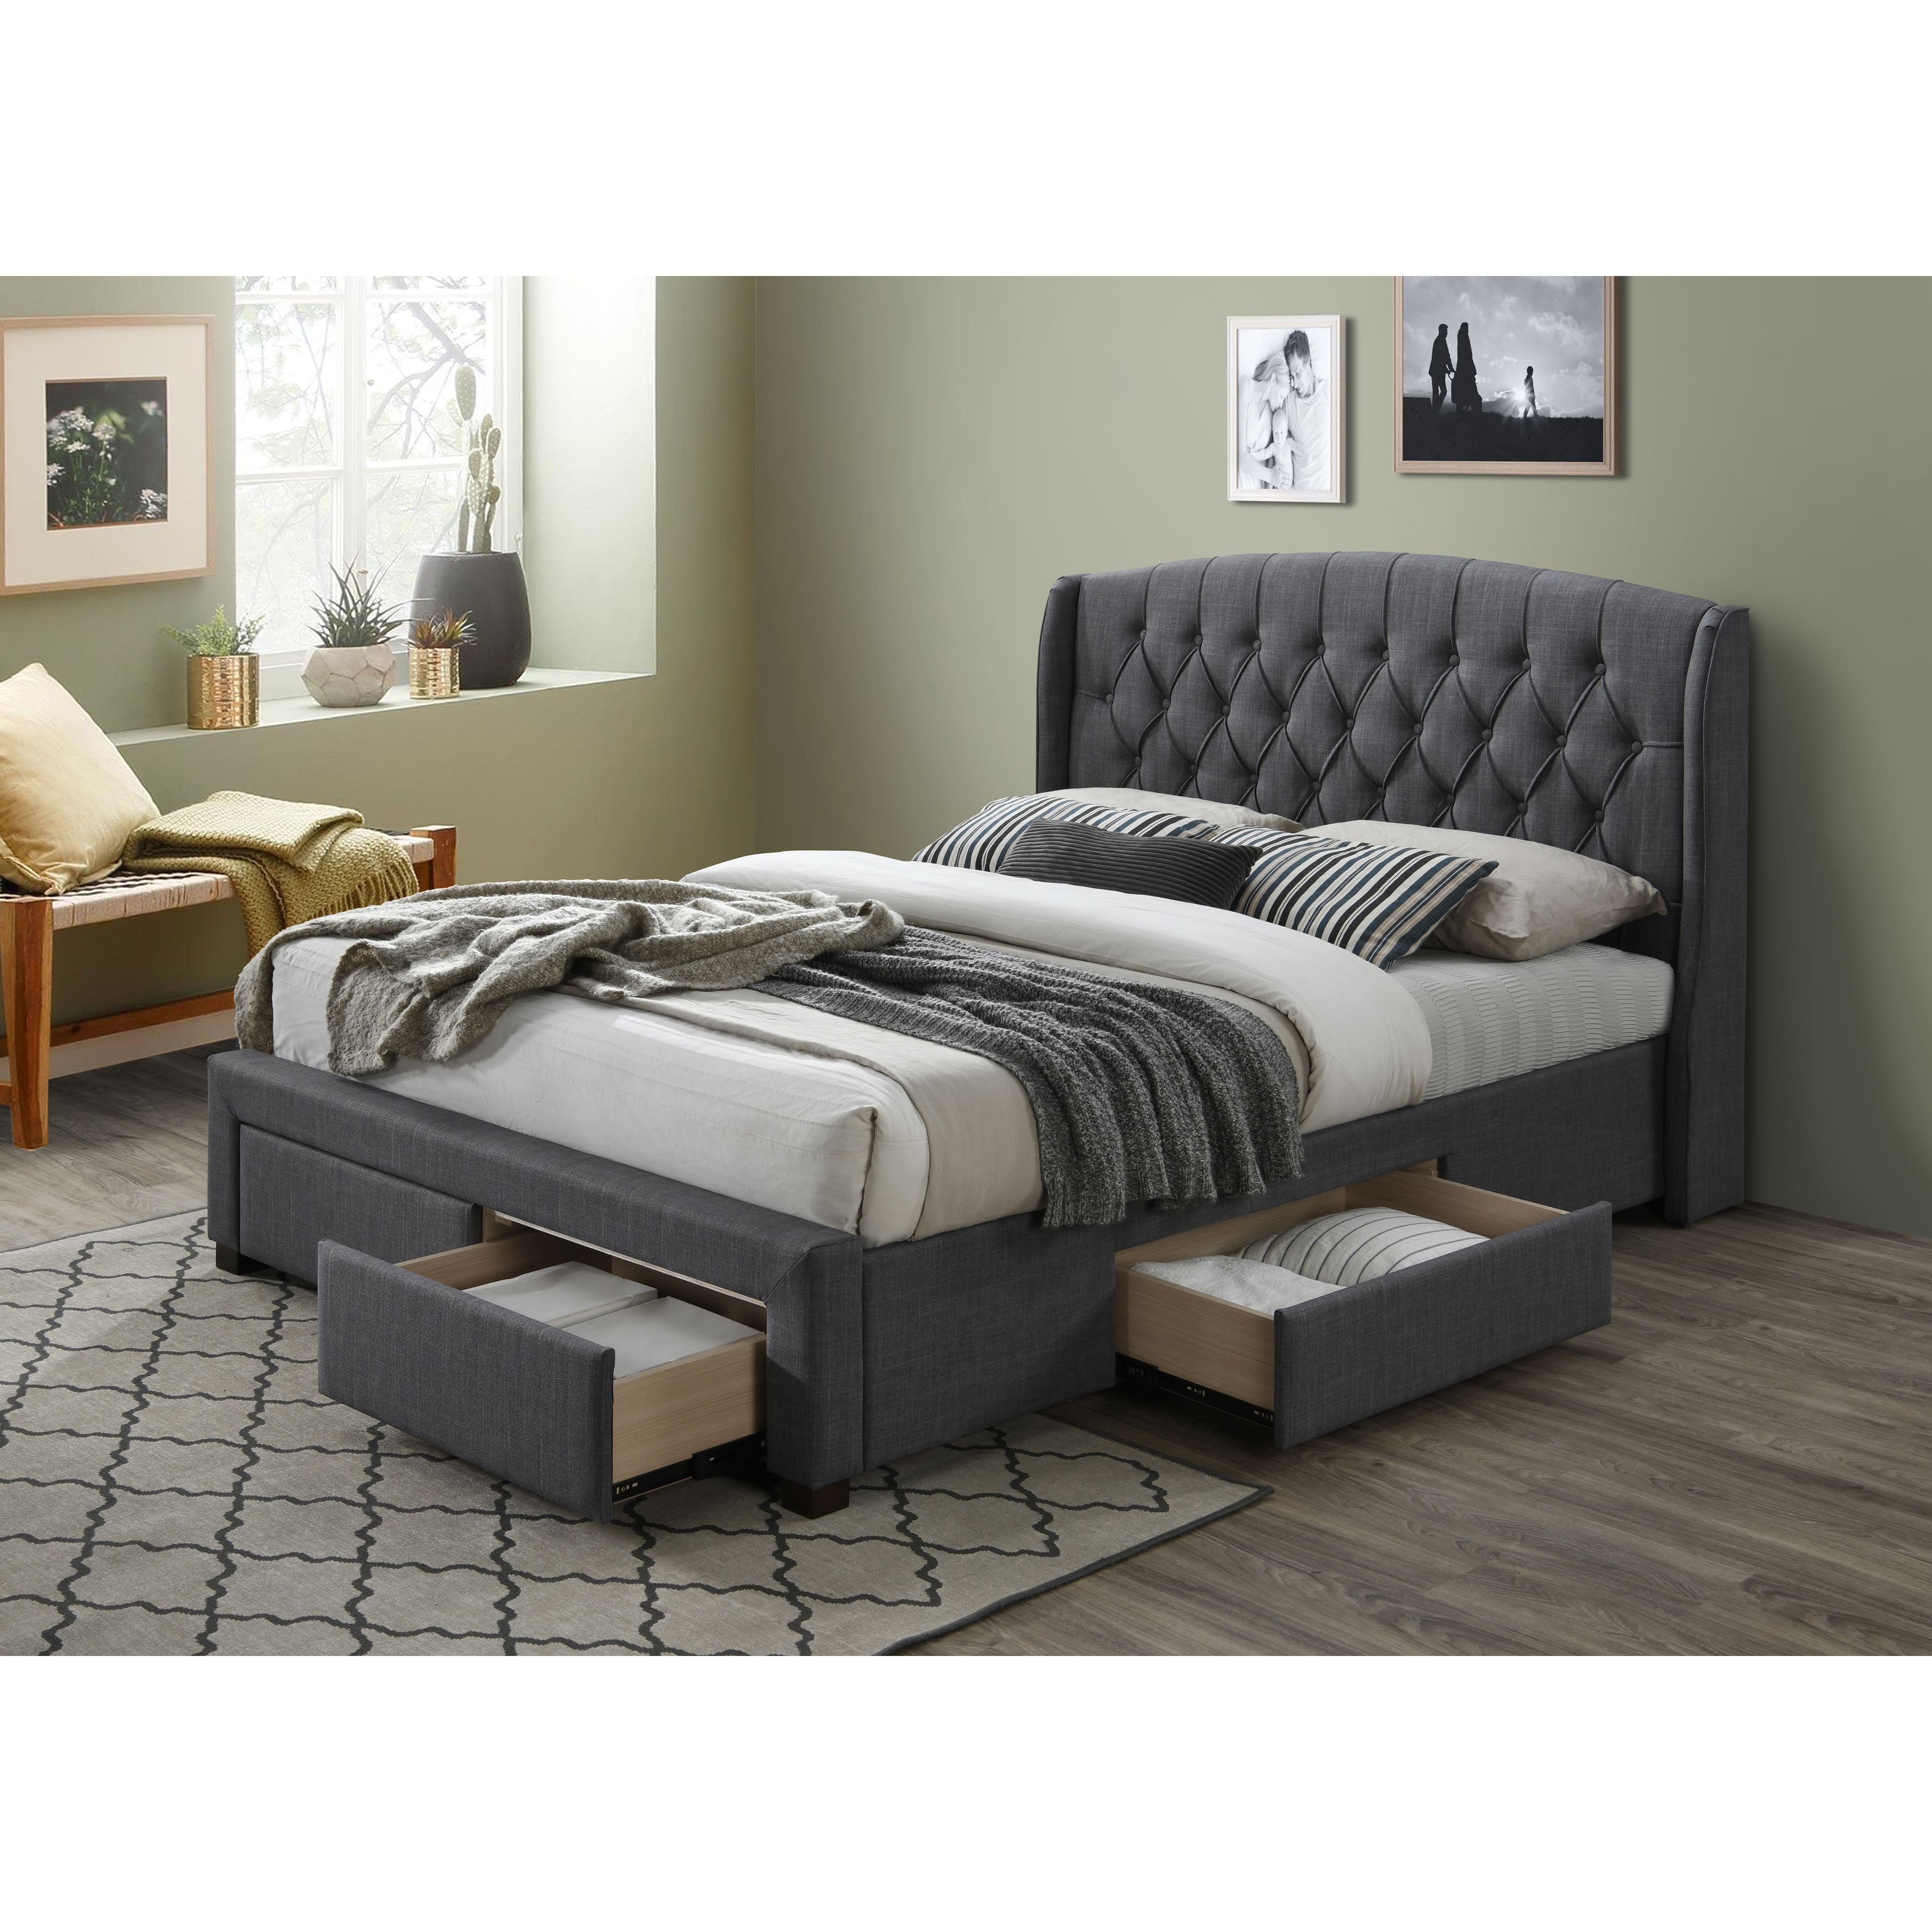 Out of Stock! Queen Size Bed Frame With Bedhead and Storage Drawers - Grey